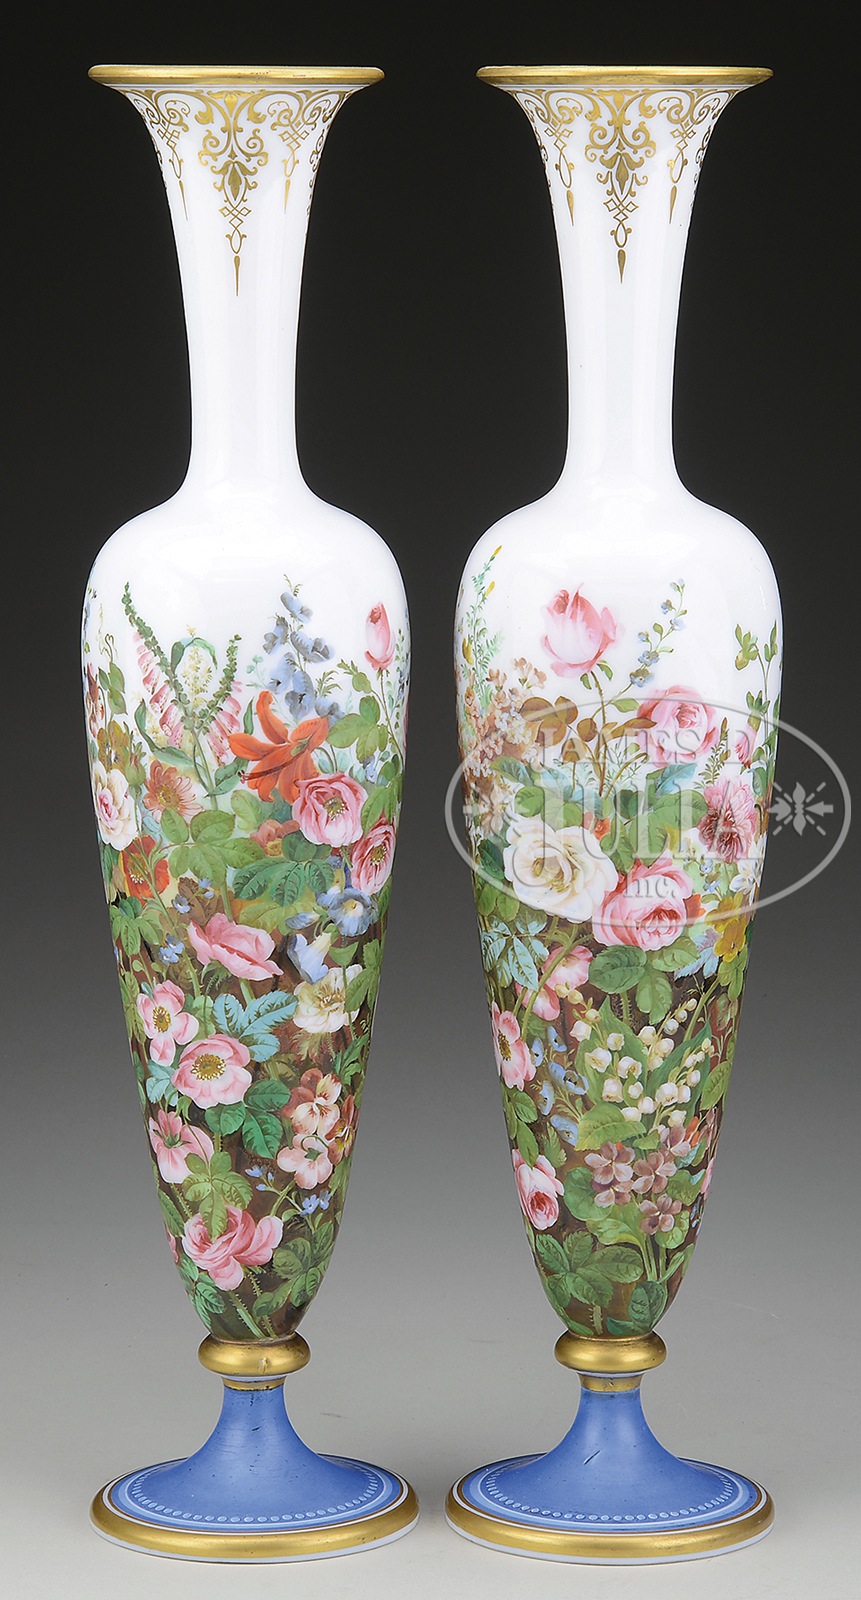 PAIR OF BRISTOL GLASS VASES. Late 19th Century. The matched pair in tall slender form with a